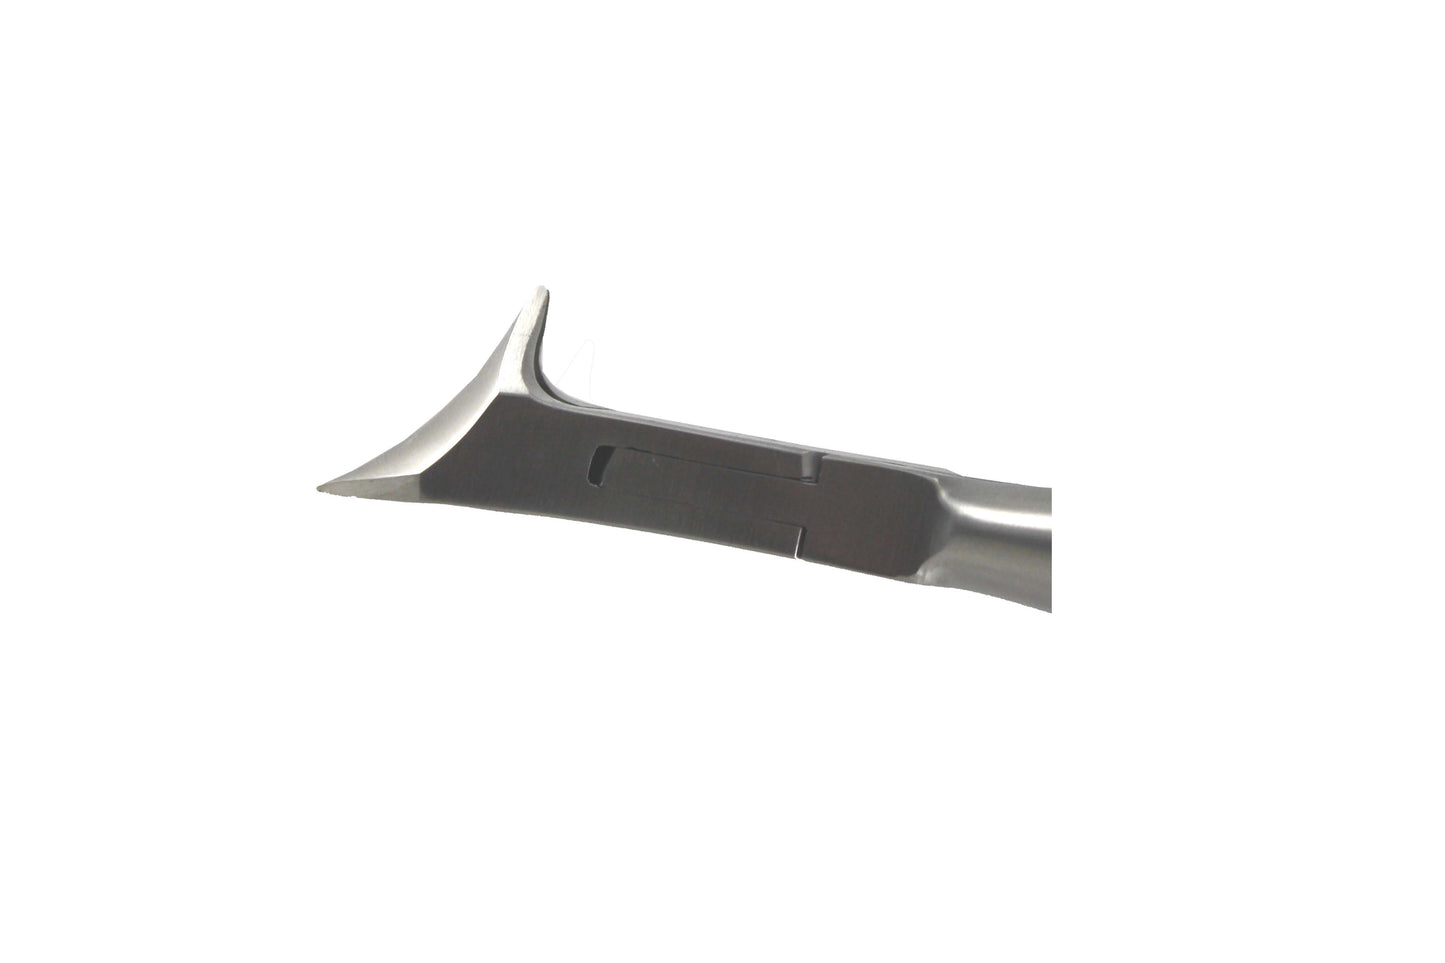 Nail Nipper Moon Face With Lock, Box Joint